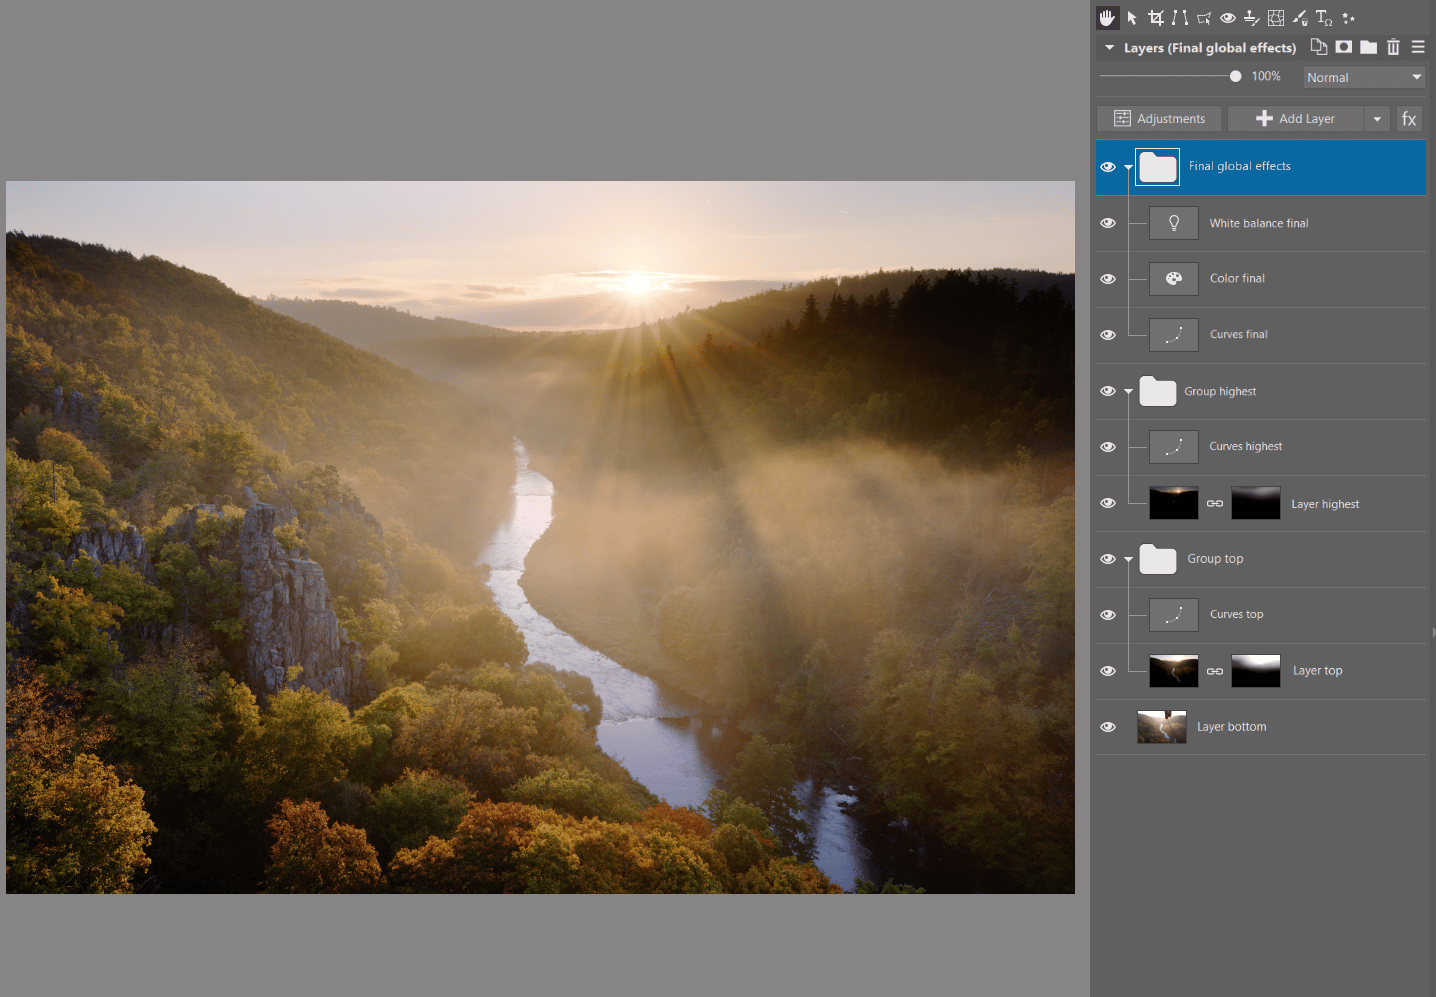 Image Stacking for Landscape Photos